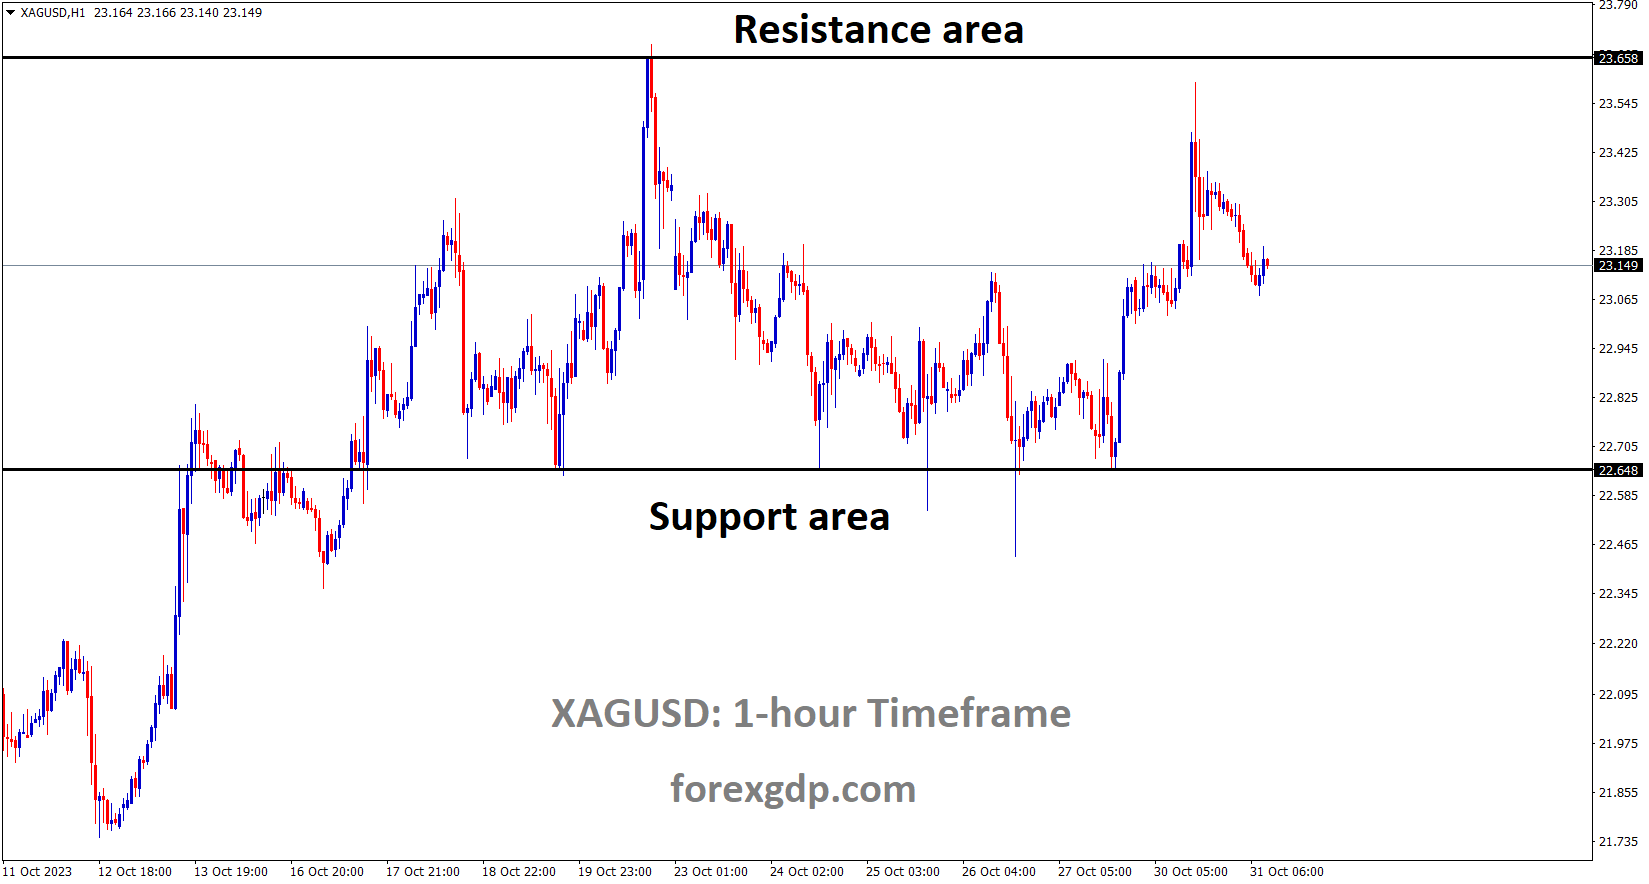 XAGUSD Silver price is moving in the Box pattern and the market has fallen from the resistance area of the pattern